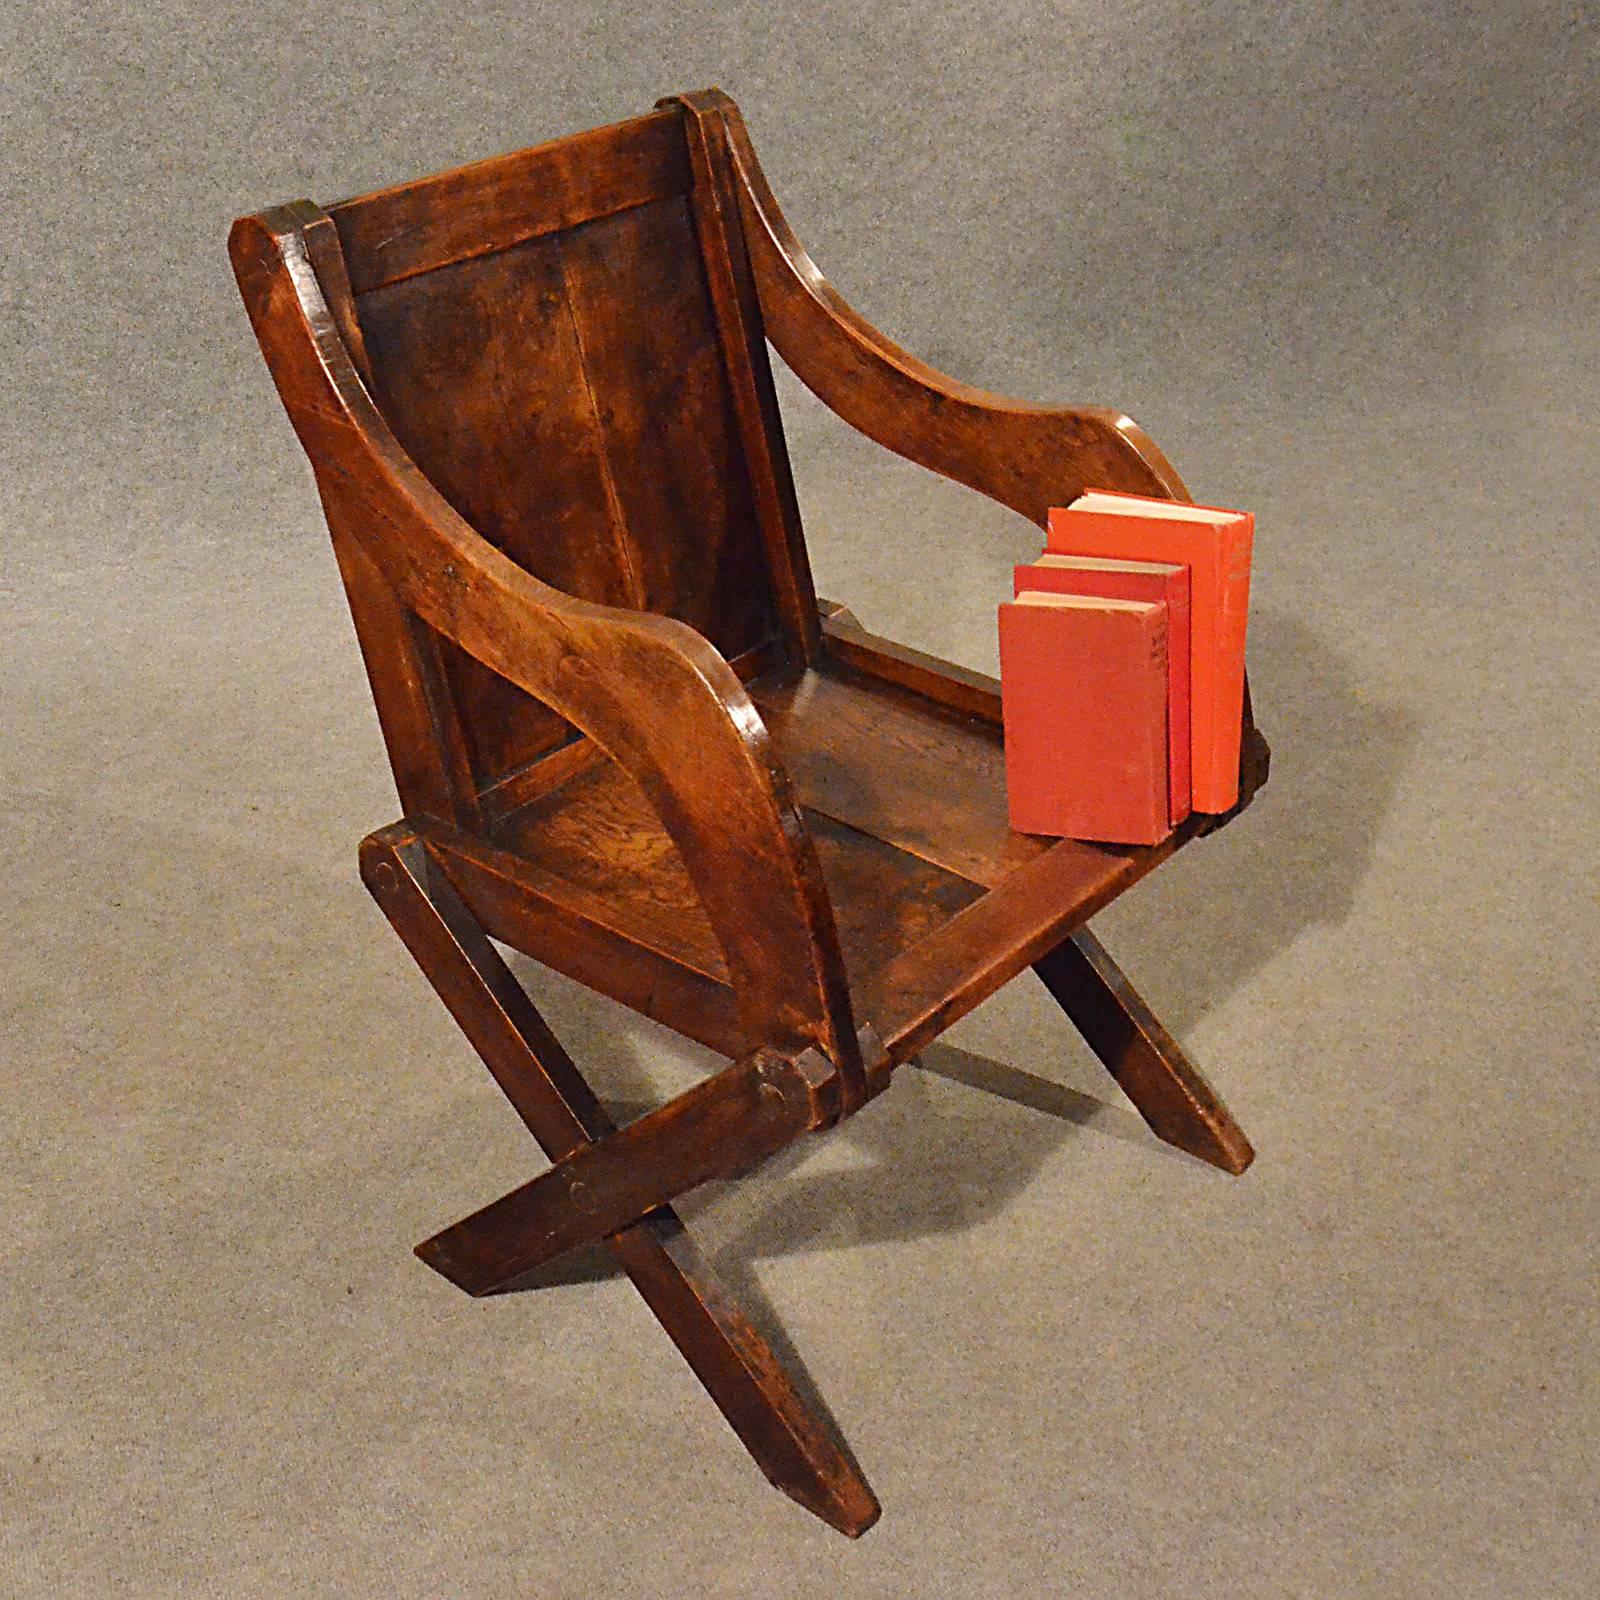 A superior antique chair presented in very good condition
Of classic 'Glastonbury' form
In oak showing charming grain with fine colour
Traditionally crafted with pegged jointing
Desirable design offering comfortable seating
Rising from X-form